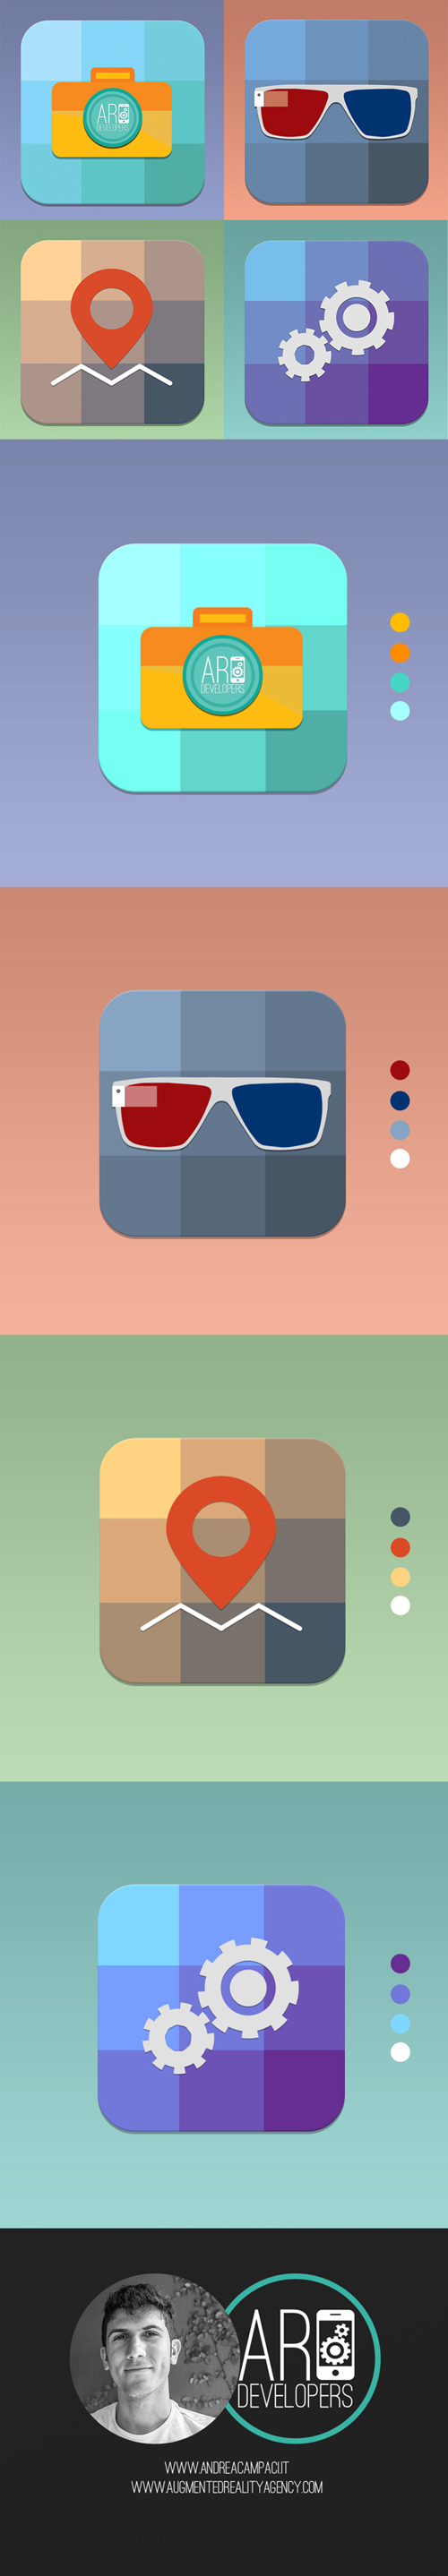 ICON KIT for AUGMENTED REALITY APP